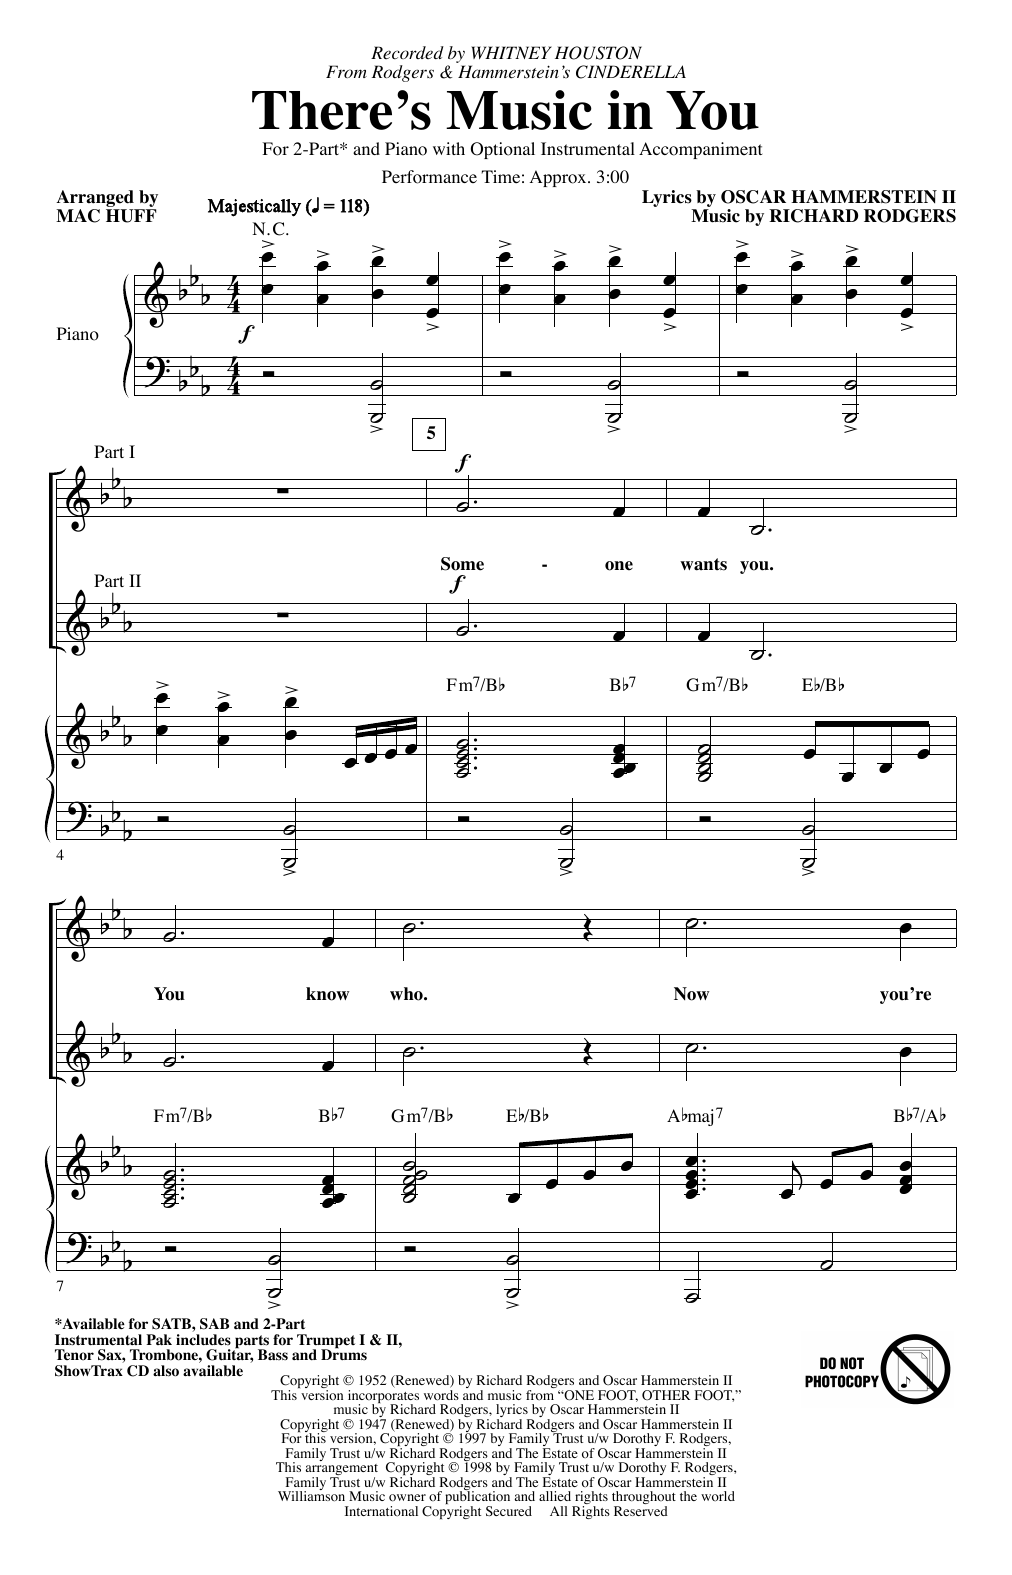 Download Whitney Houston There's Music In You (from Cinderella) Sheet Music